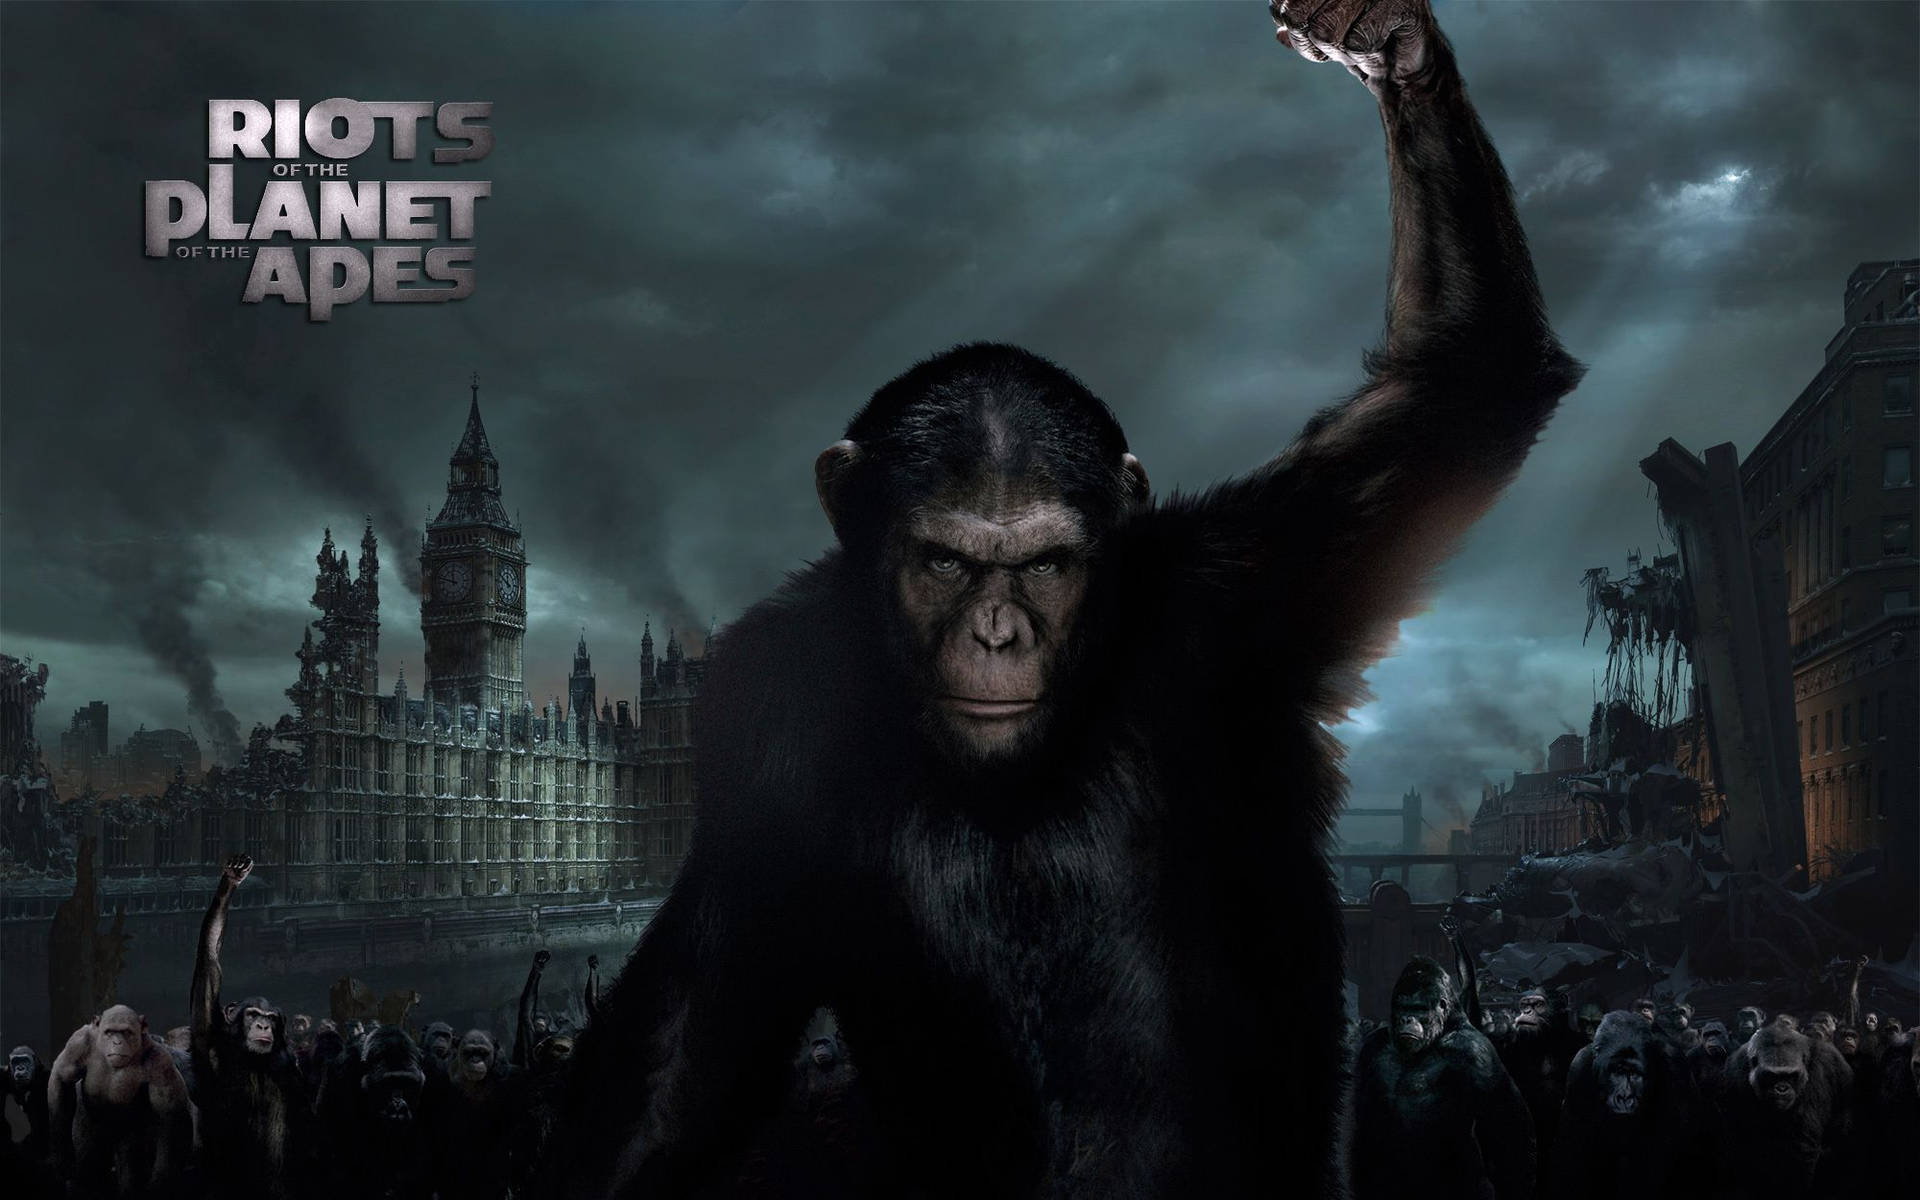 Free Planet Of The Apes Wallpaper Downloads, [100+] Planet Of The Apes  Wallpapers for FREE 